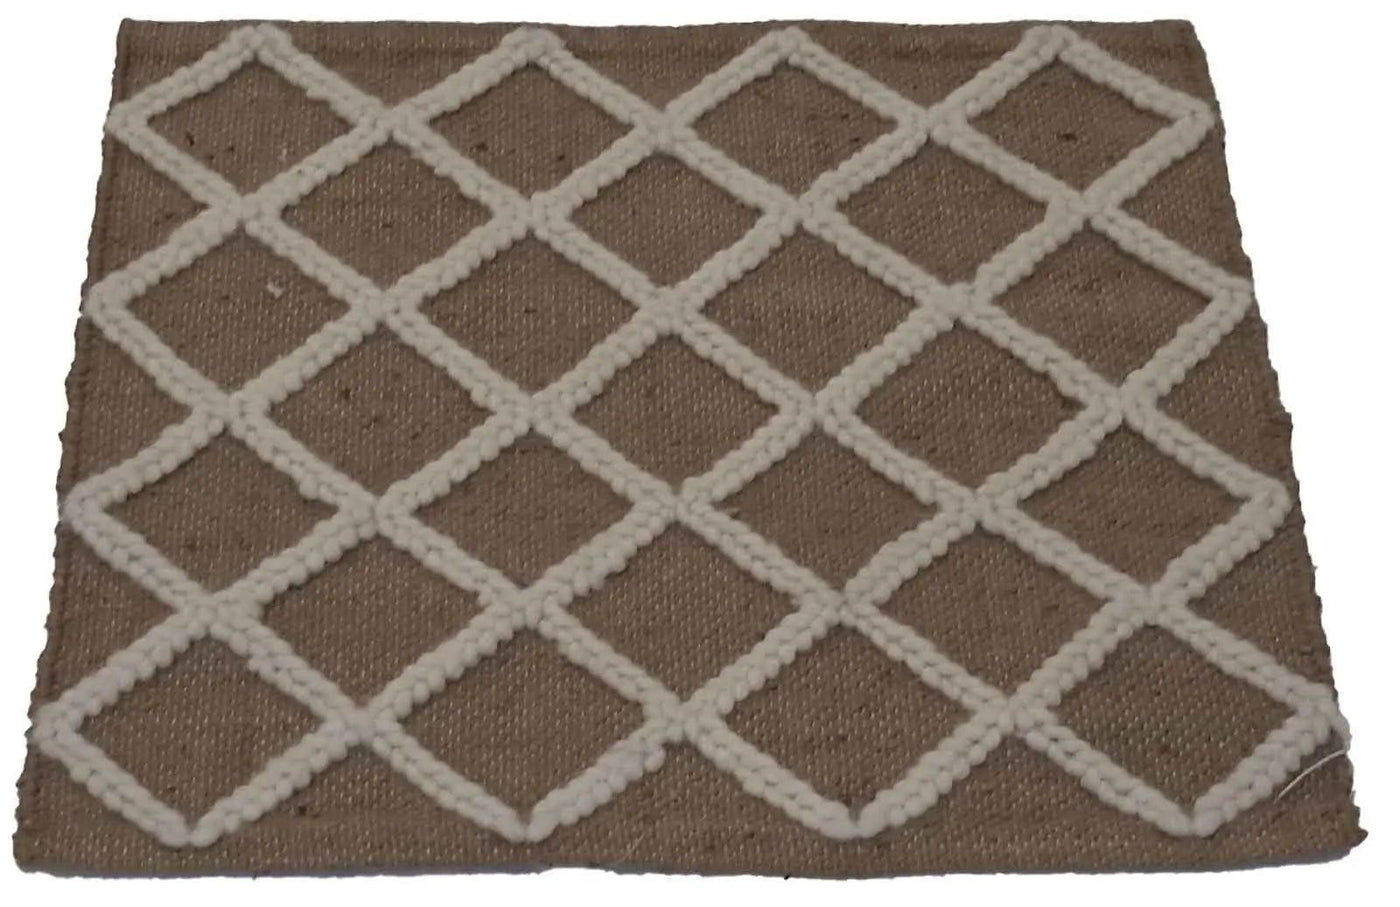 Canvello Hand Made Casual All Over Indo Kilim Rug - 2'2'' X 1'11''